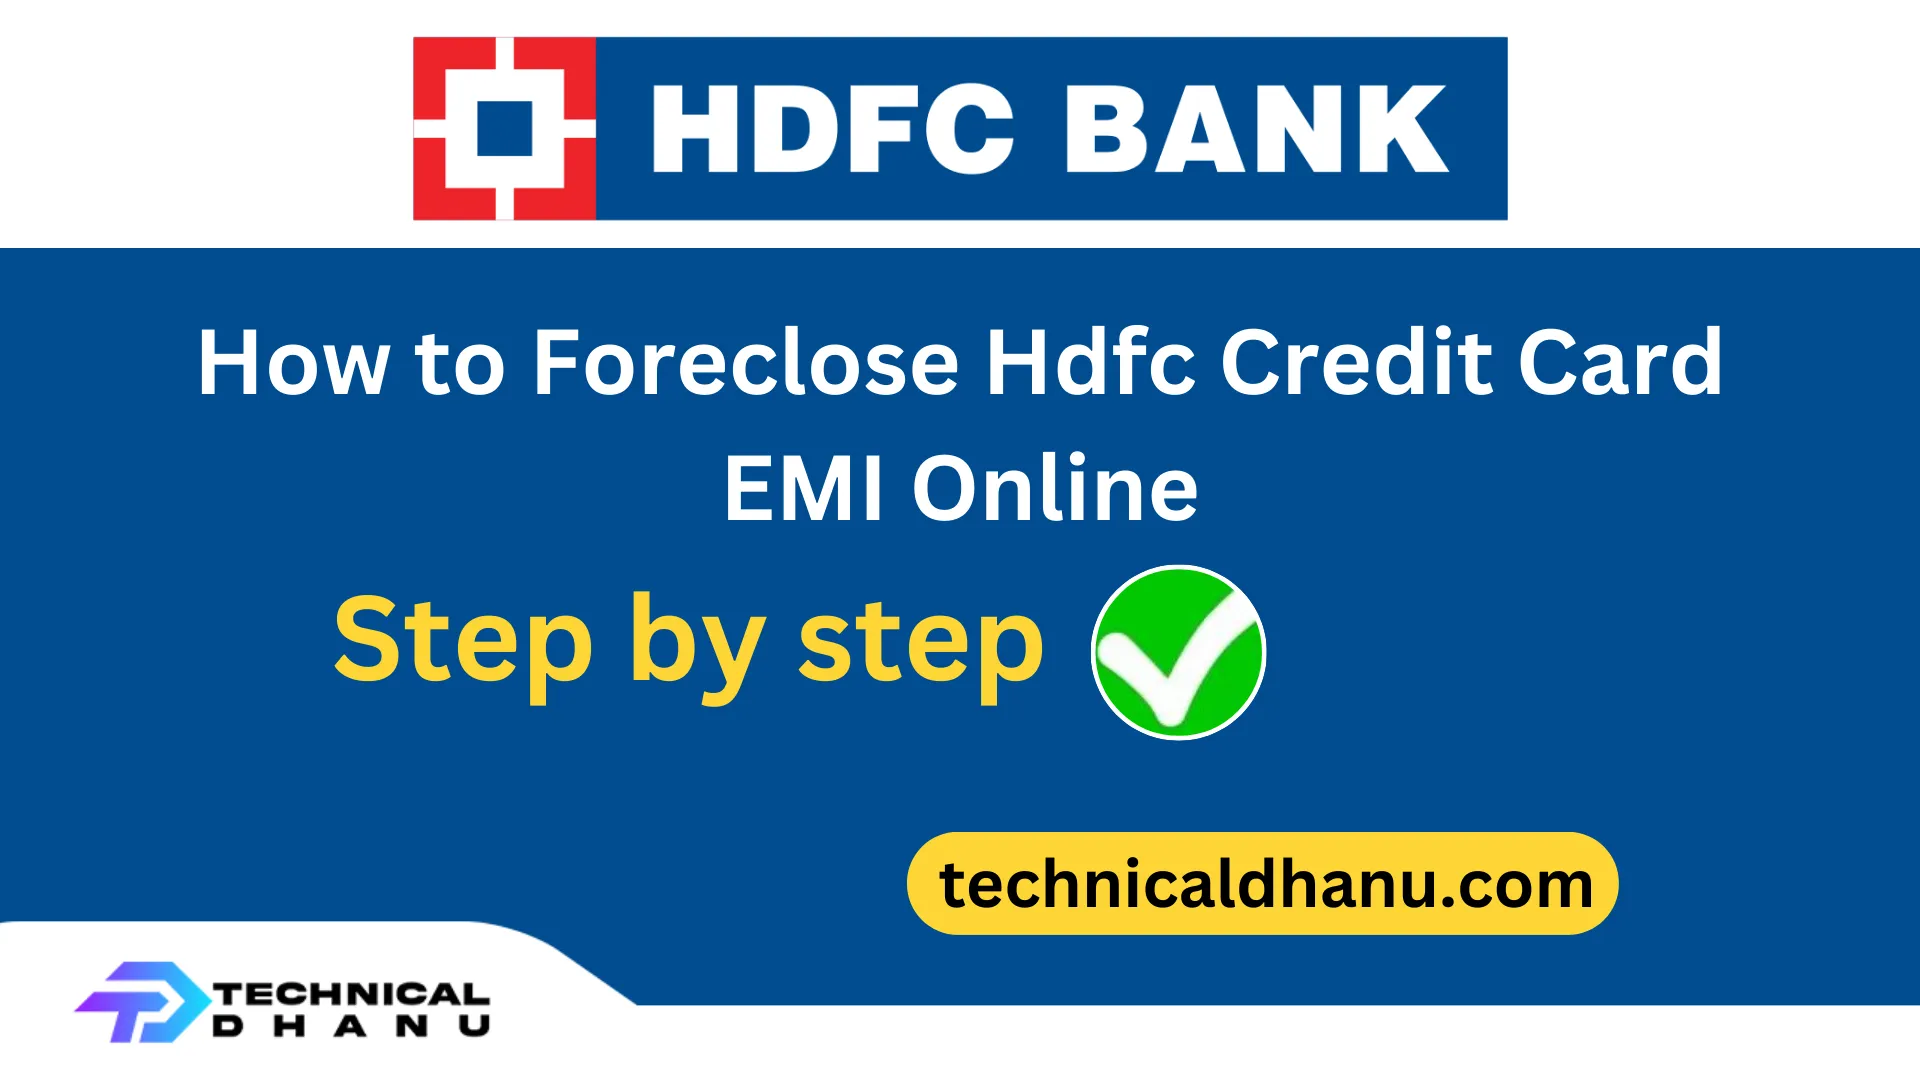 How to Foreclose Hdfc Credit Card EMI Online